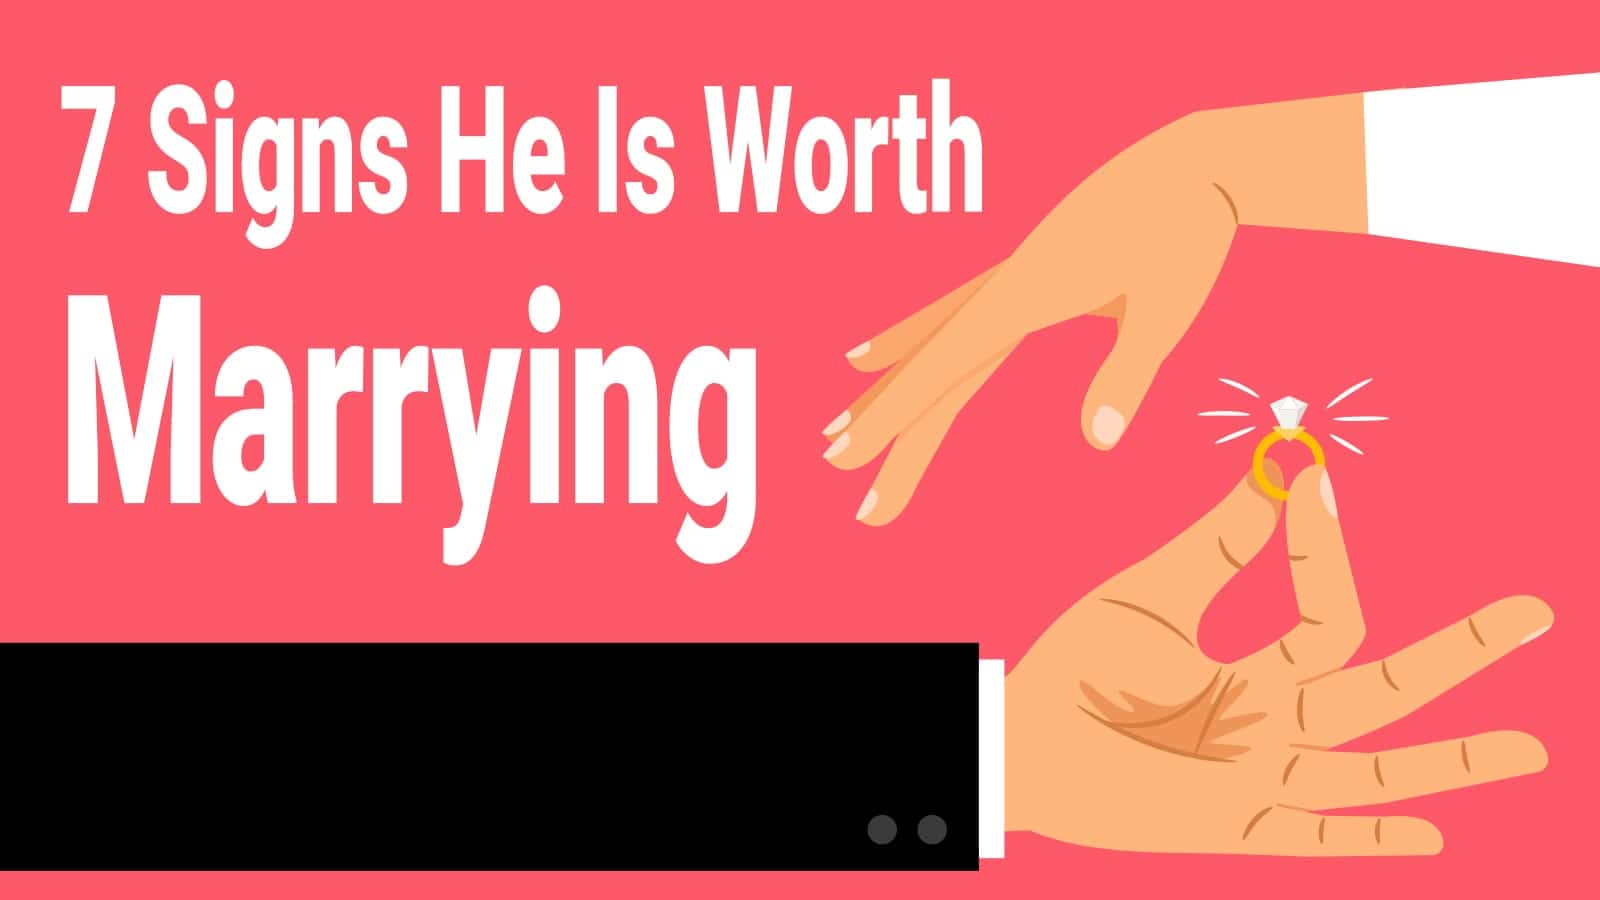 7 Signs He Is Worth Marrying